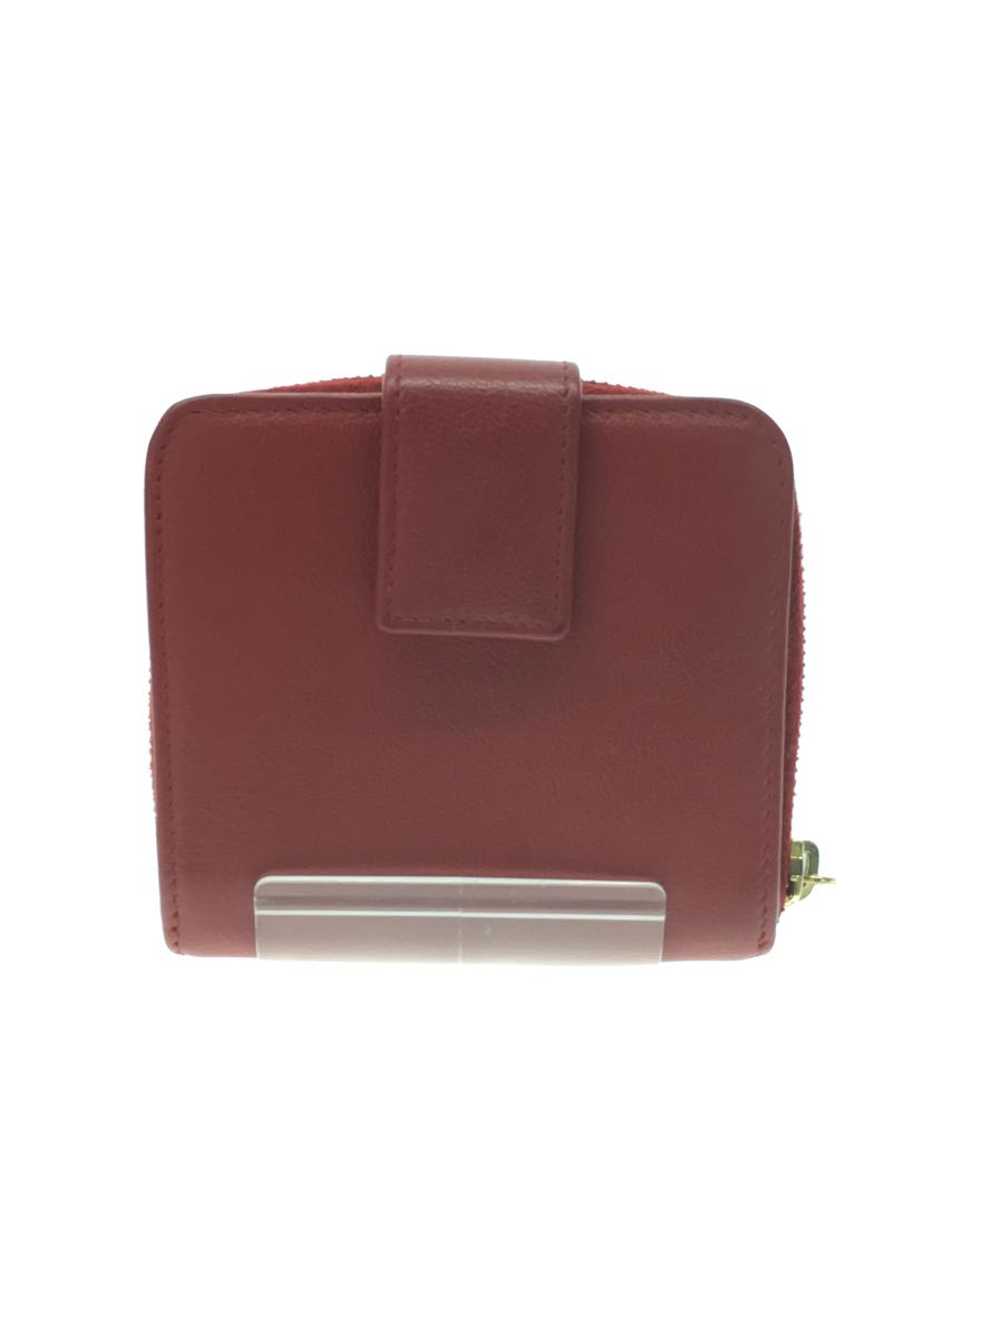 Yves Saint Laurent Bifold Wallet Leather Red Plai… - image 2